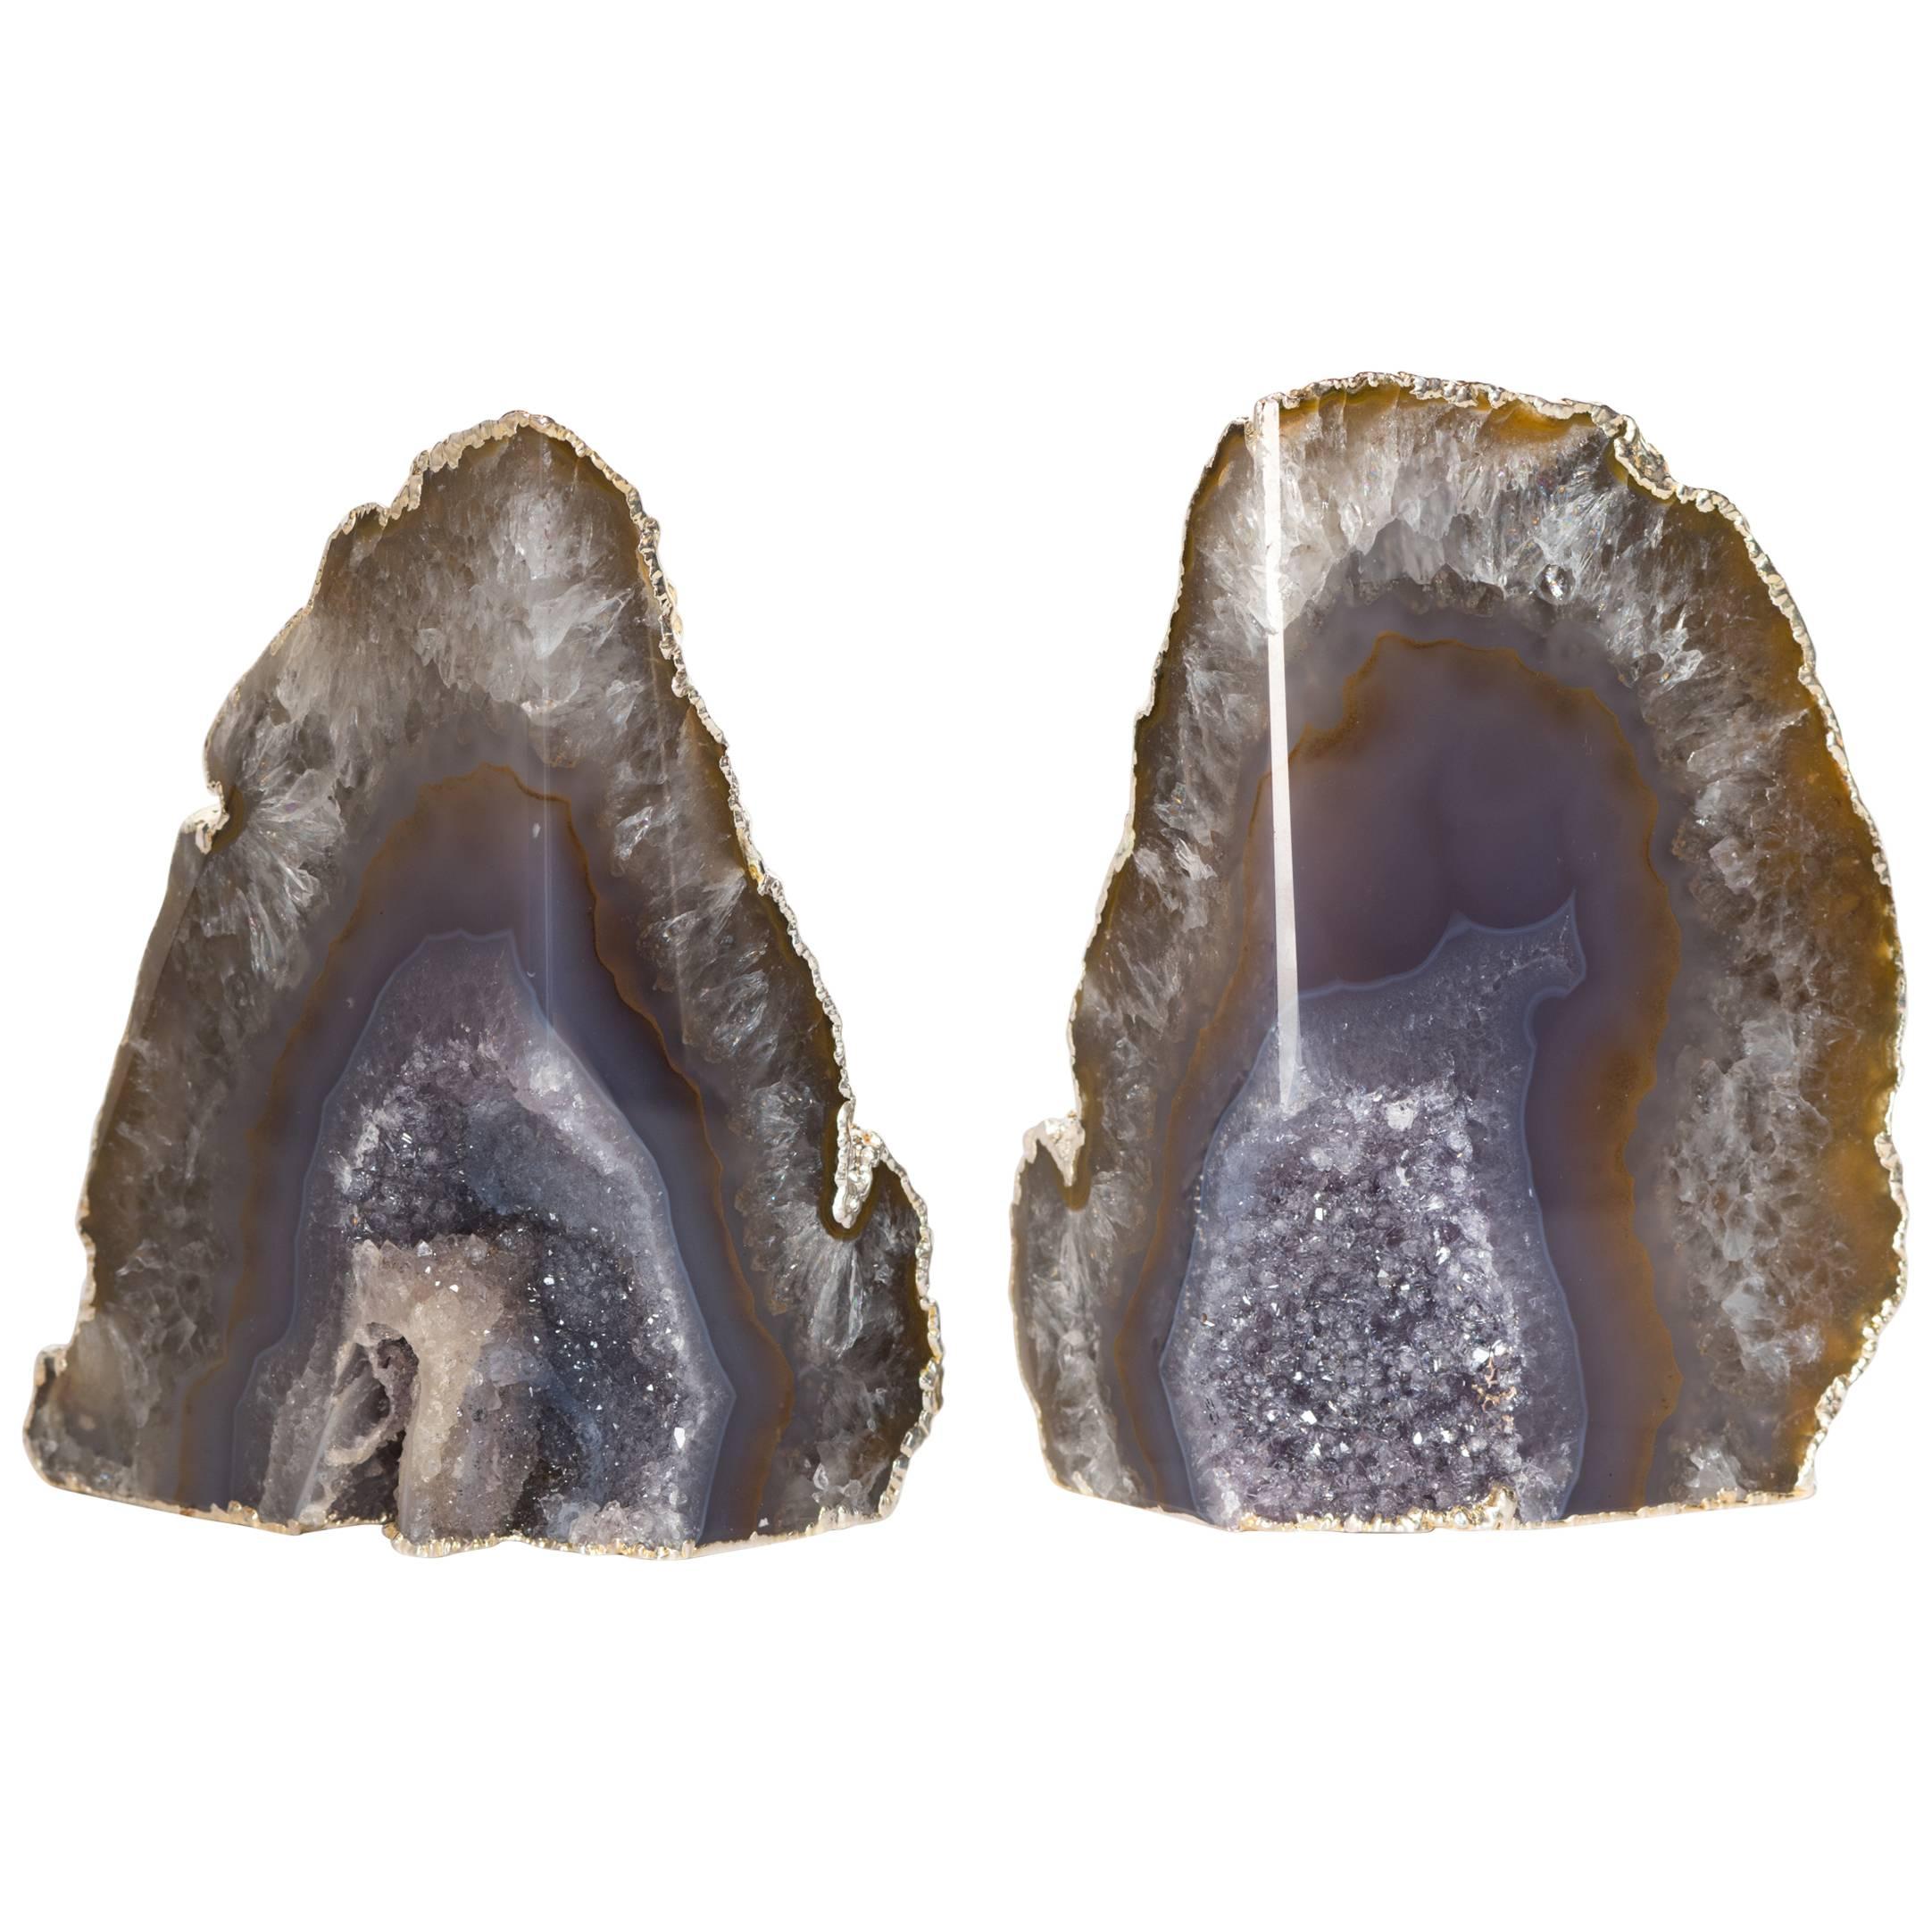 Stunning pair of natural agate stone bookends with fine amethyst crystalline centers. Organic stone with polished fronts with natural rough edges that have been finished in 24-karat white gold electroplating. Can be used in different configurations